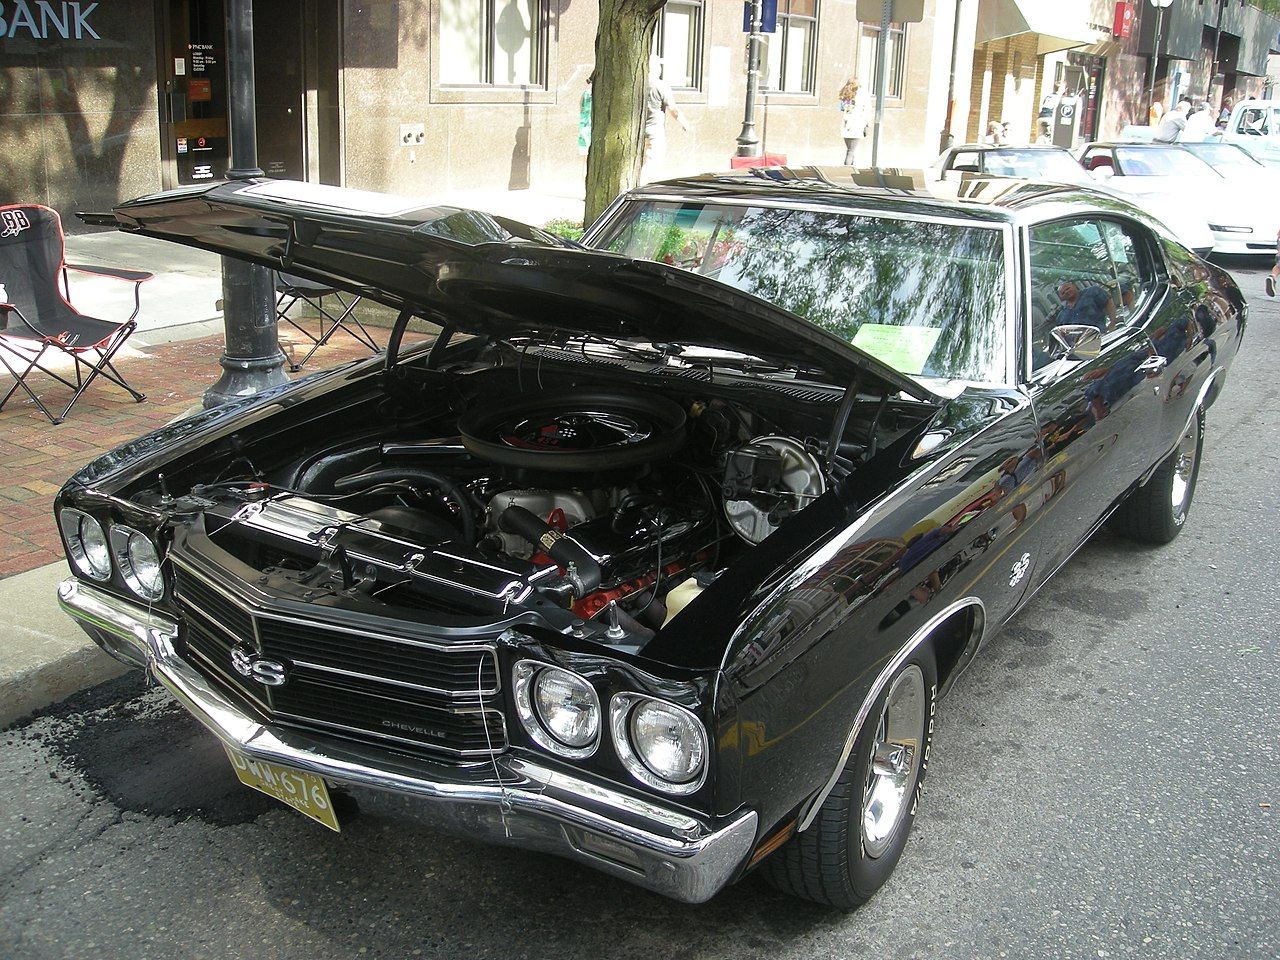 A parked 1970 Chevy Chevelle SS